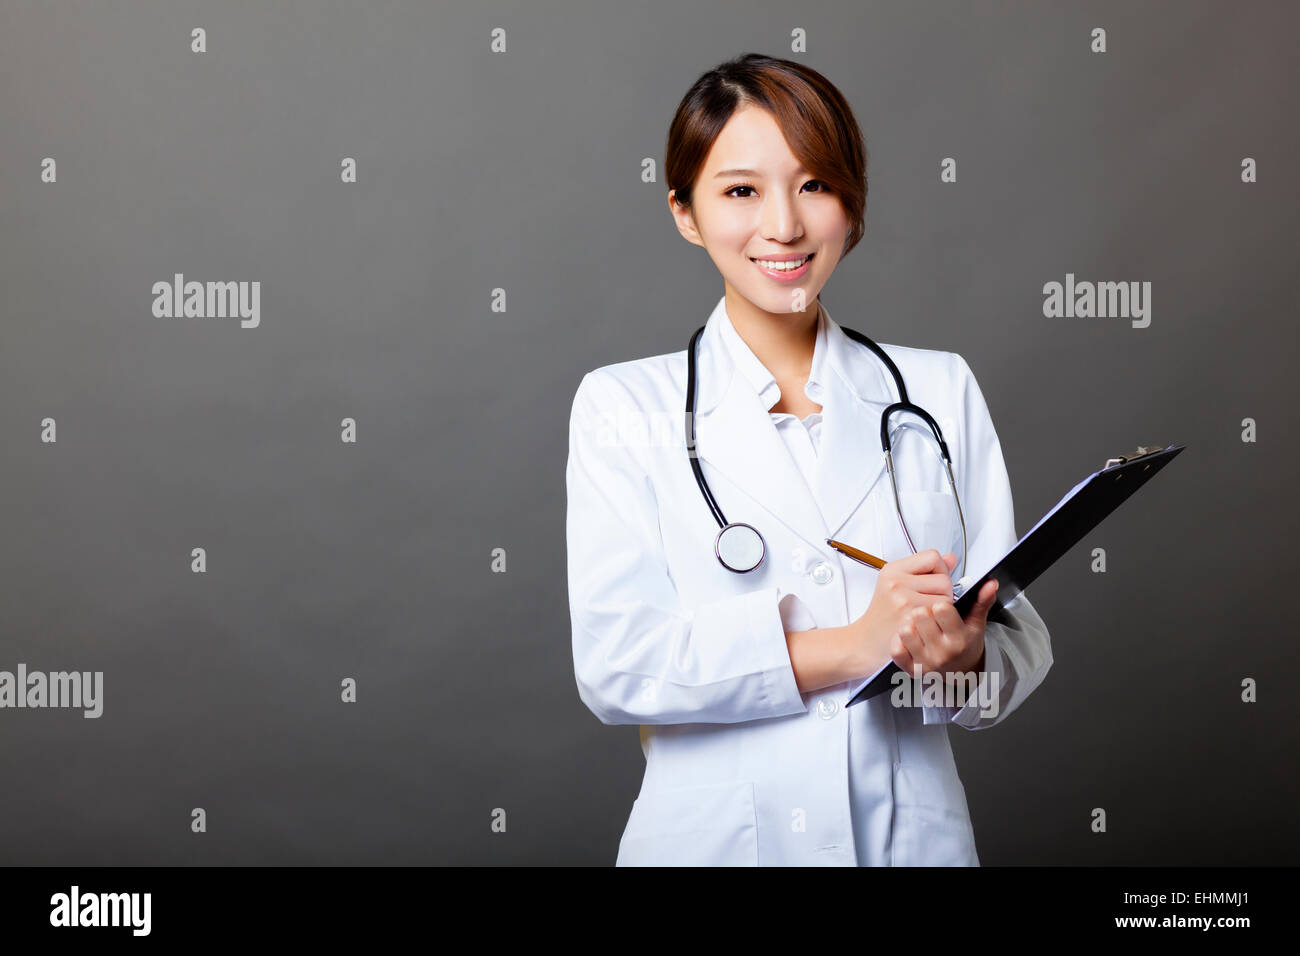 Smiling female doctor with clipboard Banque D'Images